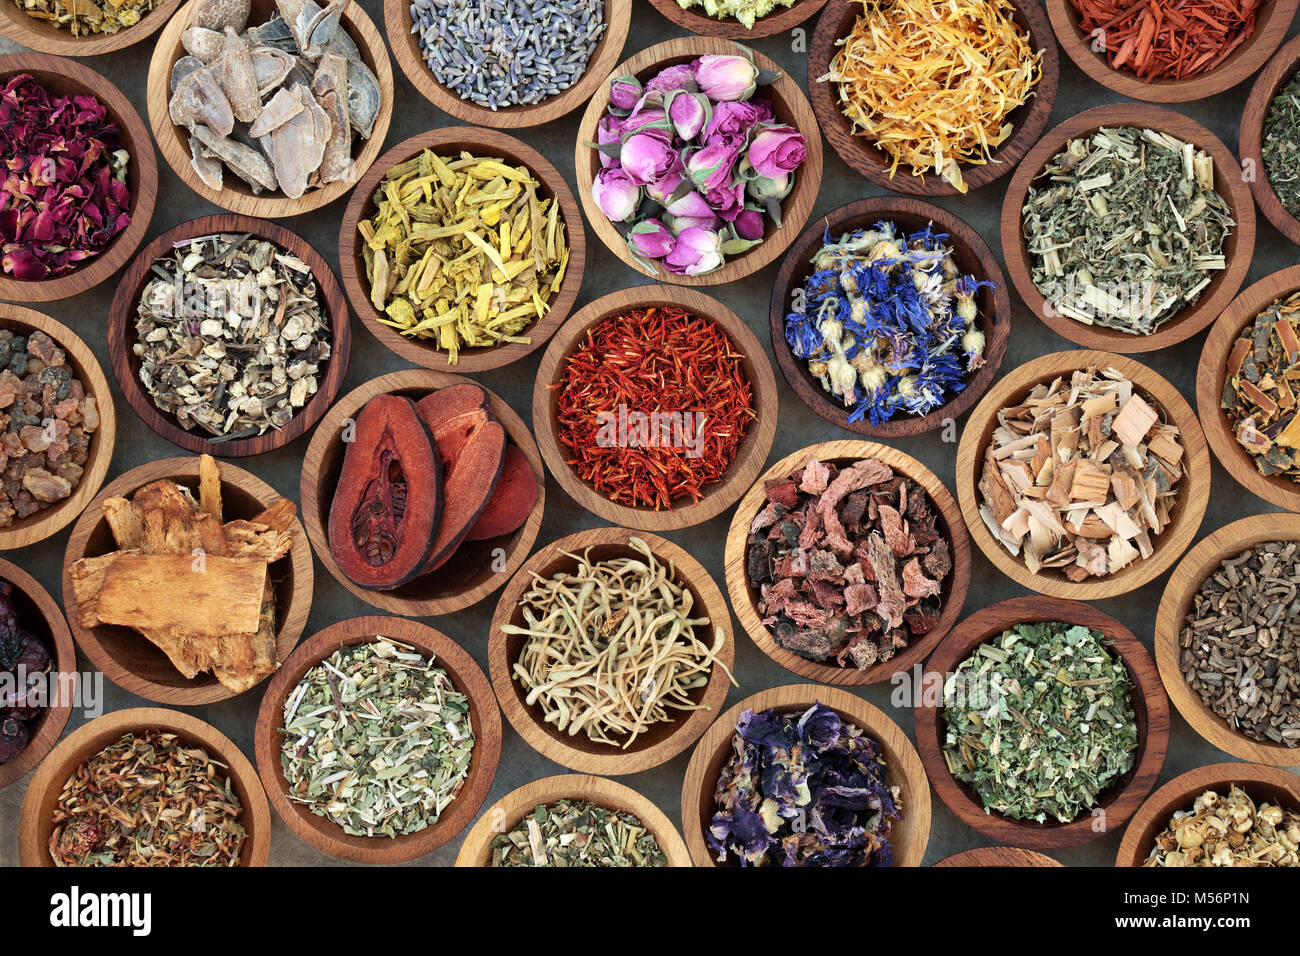 Herbal medicine used in alternative remedies with a variety of dried herbs and flowers in wooden bowls. Top view. Stock Photo